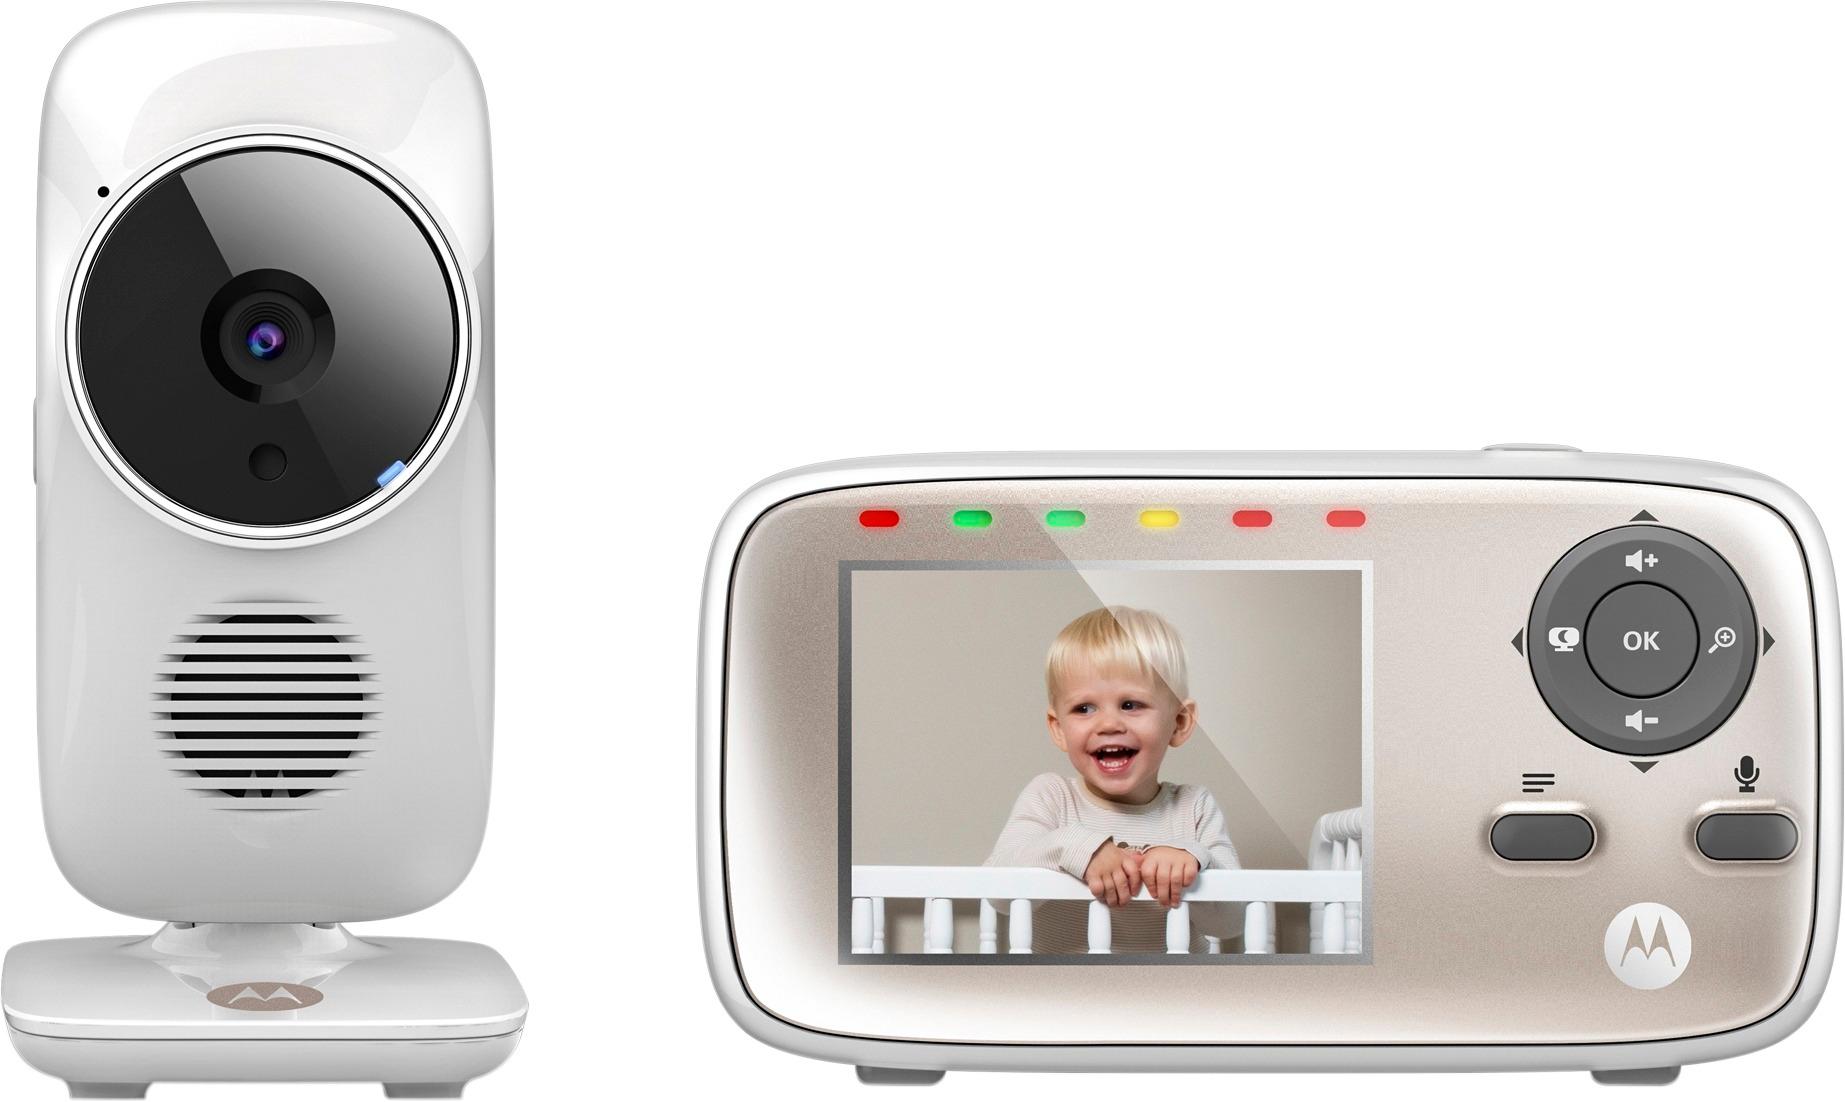 Motorola Wi-Fi Video Baby Monitor 2.8" Screen White MBP667CONNECT Best Buy